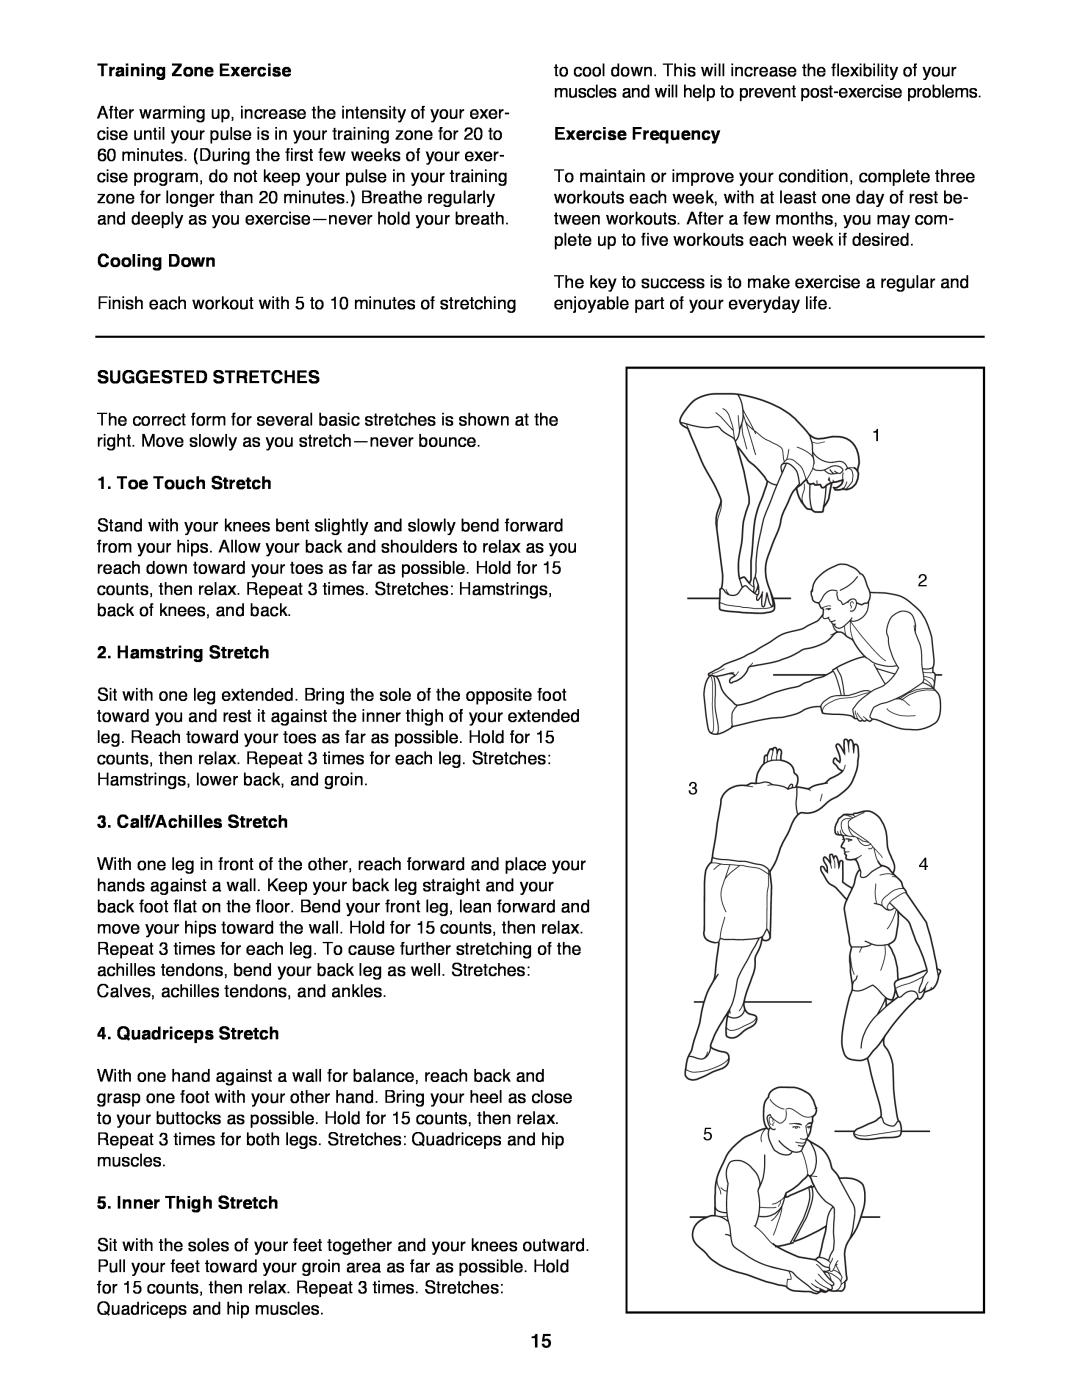 Weslo DX3 user manual Training Zone Exercise, Cooling Down, Exercise Frequency, Suggested Stretches, Toe Touch Stretch 